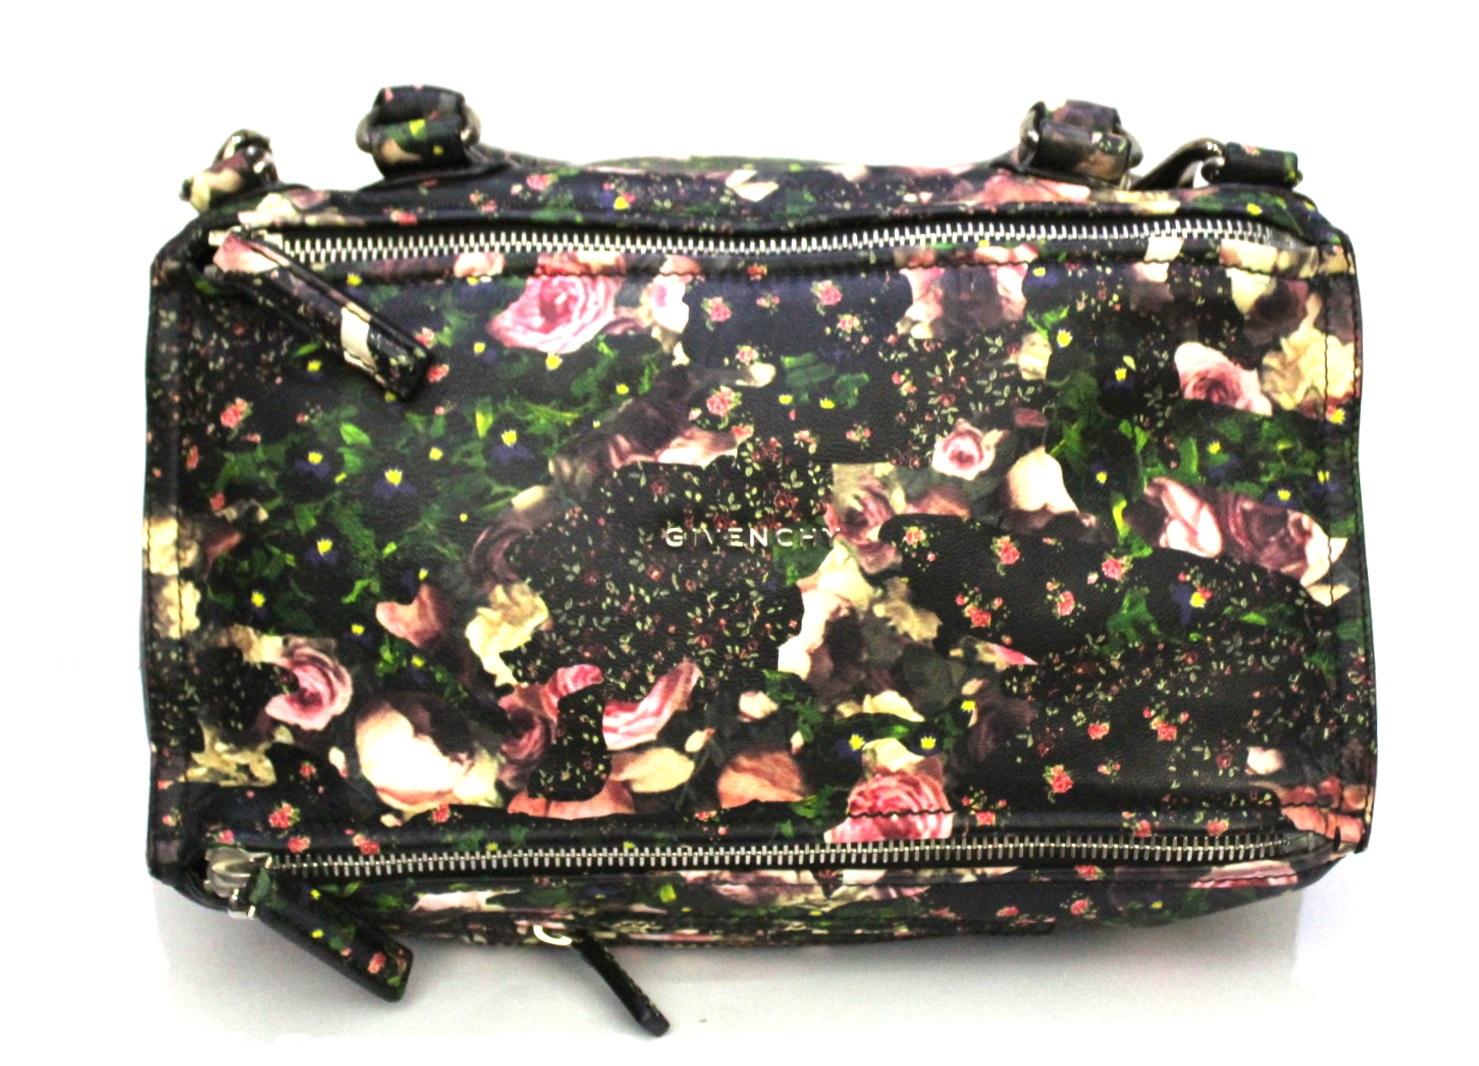 Givenchy Pandora model bag made of black leather with floral pattern.
Equipped with handle and removable shoulder strap. Zip closure, very large inside.
The bag is in excellent condition.